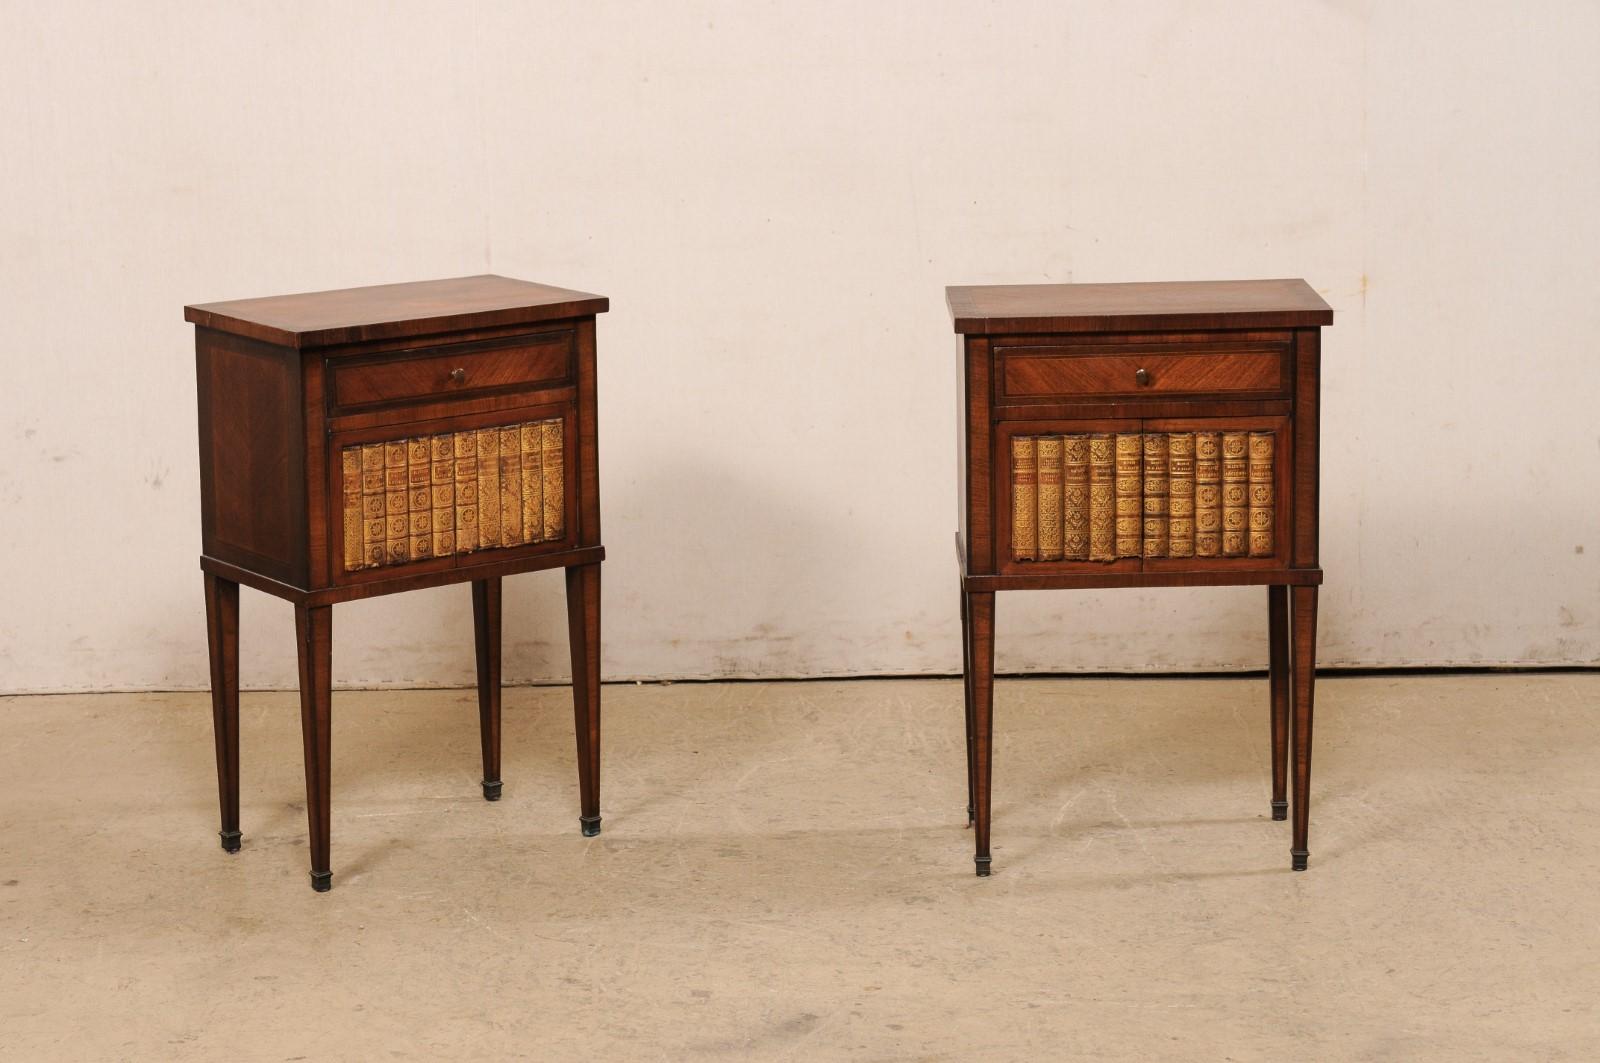 A French pair of raised side chests with leather book designed fronts, from the early 20th century. These antique side chests from France each feature beautiful book-matched veneer tops over a case which houses a single drawer over a pair of doors